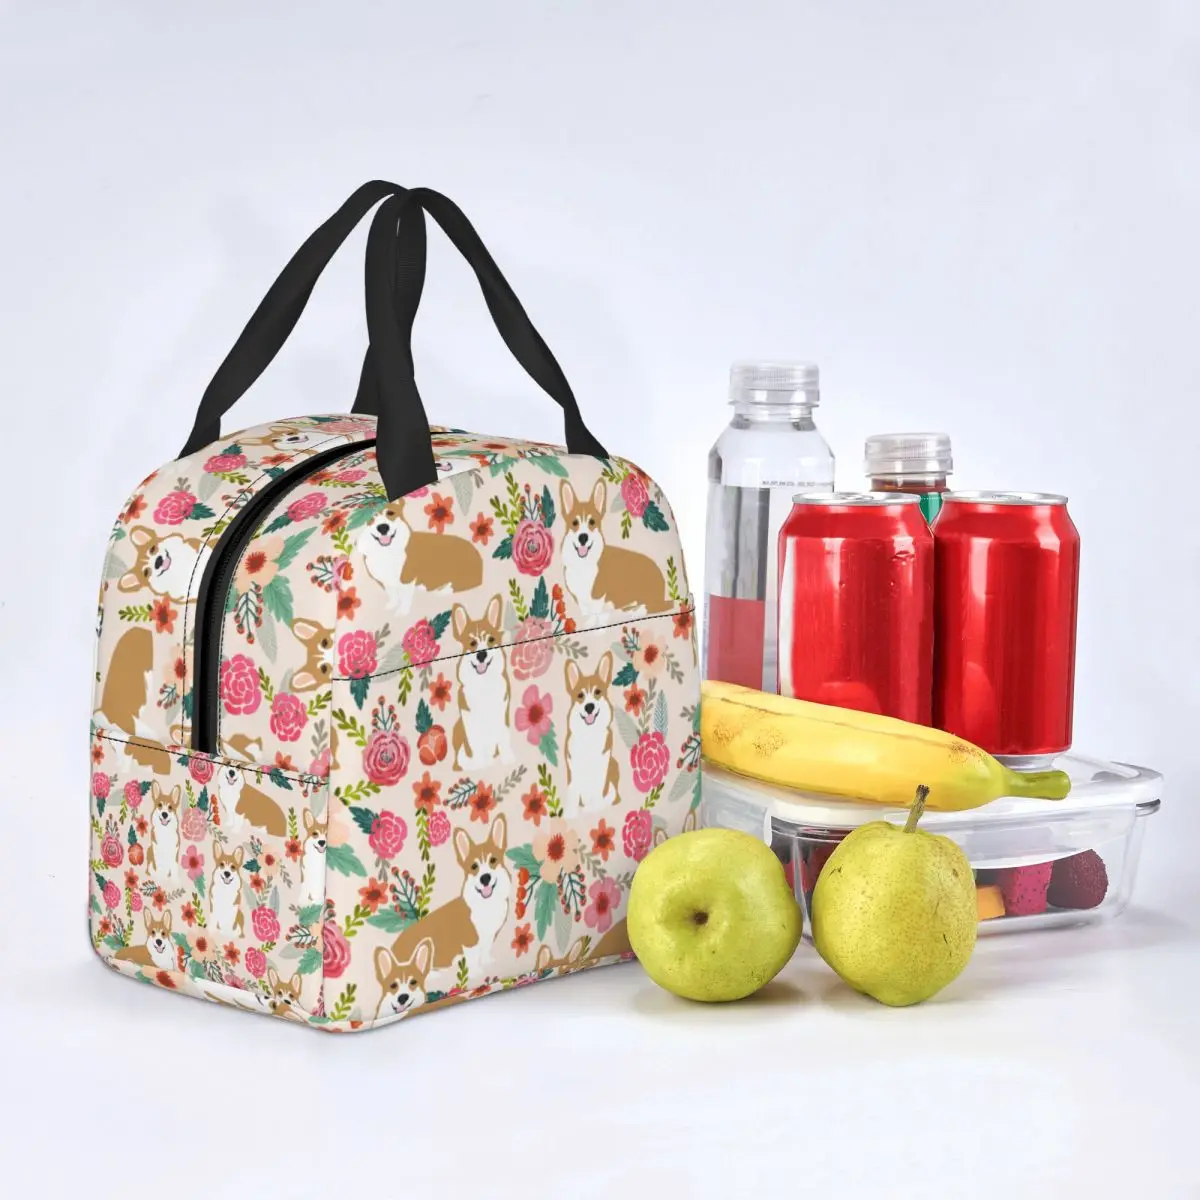 Welsh Corgi Dog Lunch Bag Portable Insulated Canvas Cooler Animal Thermal School Lunch Box for Women Kids